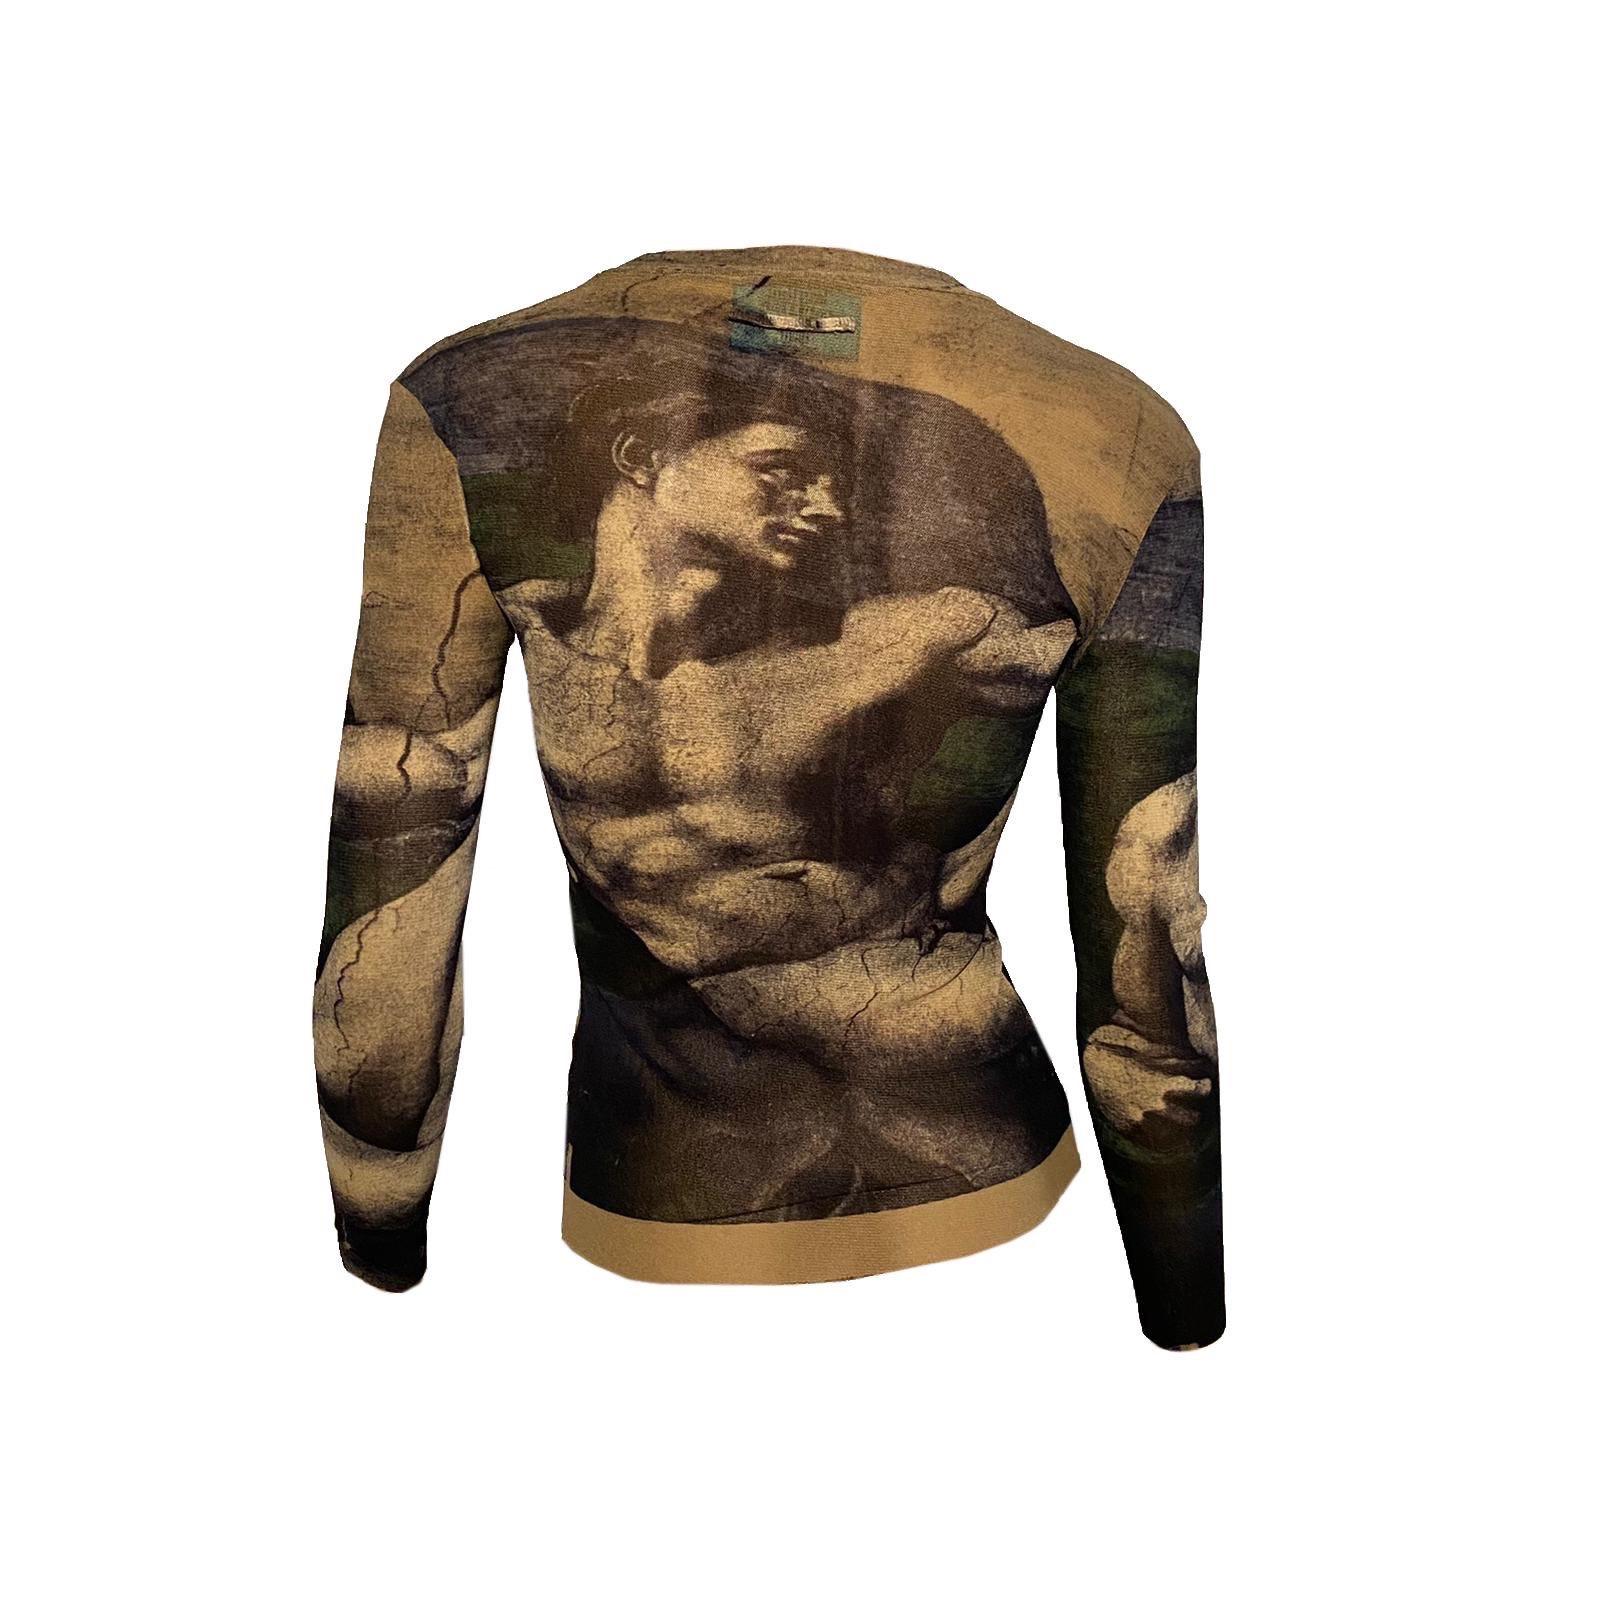 Jean Paul Gaultier long sleeve top from Spring/Summer 1995 featuring “The Creation of Adam” print by Michelangelo.

100% Polyamide 

Marked as size L but runs smaller

Shoulder to shoulder: 39 cm/ 15,3 inch
Pit to pit: 38 cm/ 14,9 inch
Shoulder to